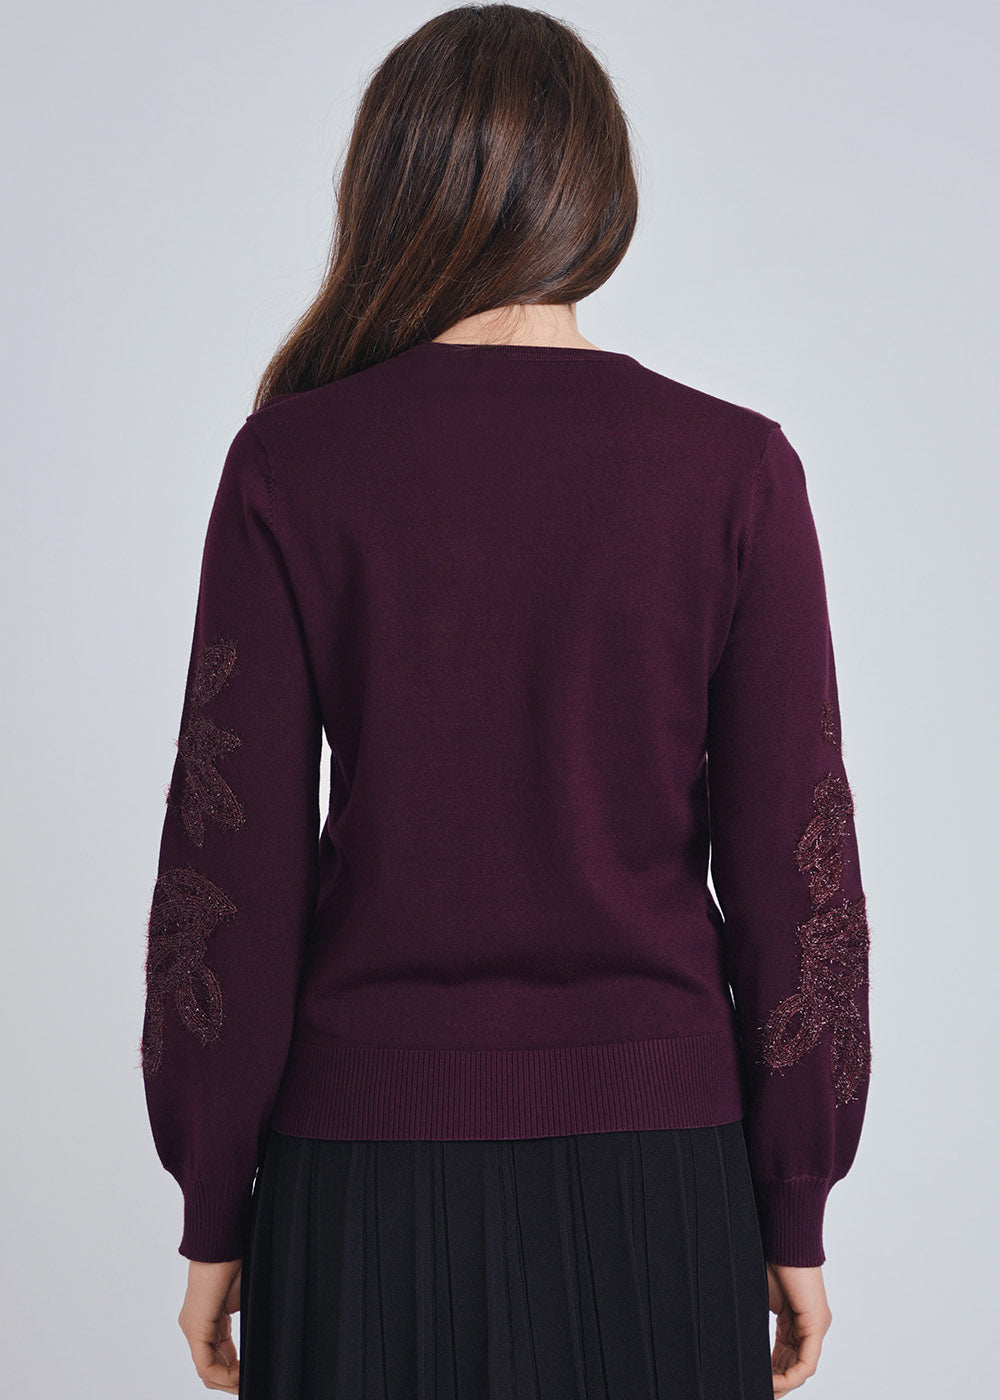 Burgundy Knit Sweater With Detailed Sleeve